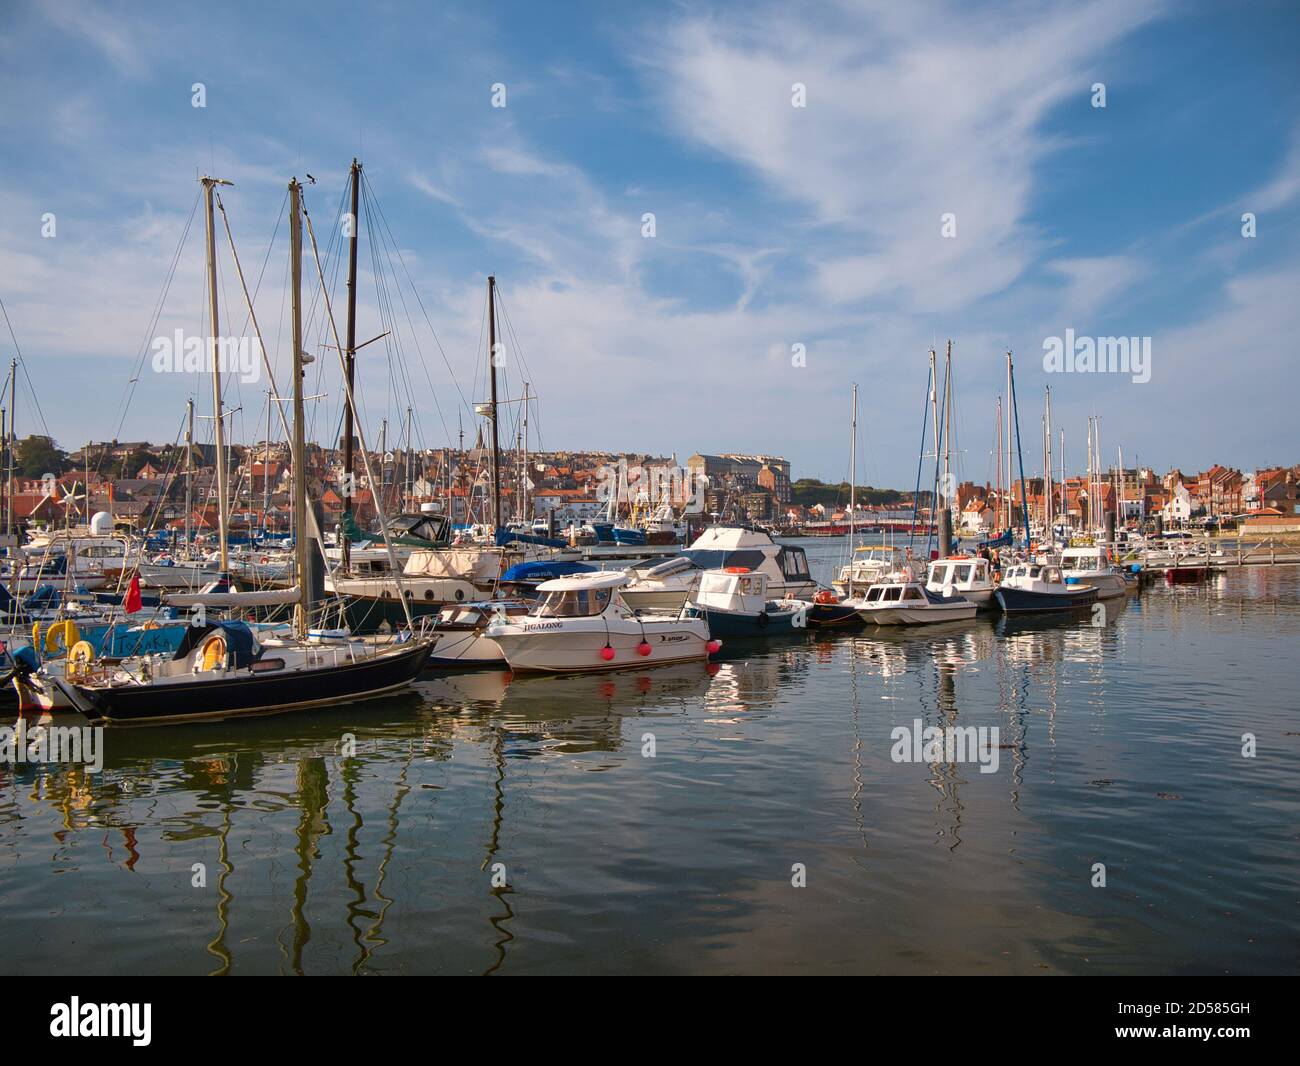 Leisure craft and small fishing boats moored at floating pontoons in Whitby Marina at the mouth of the River Esk - taken on a sunny day Stock Photo